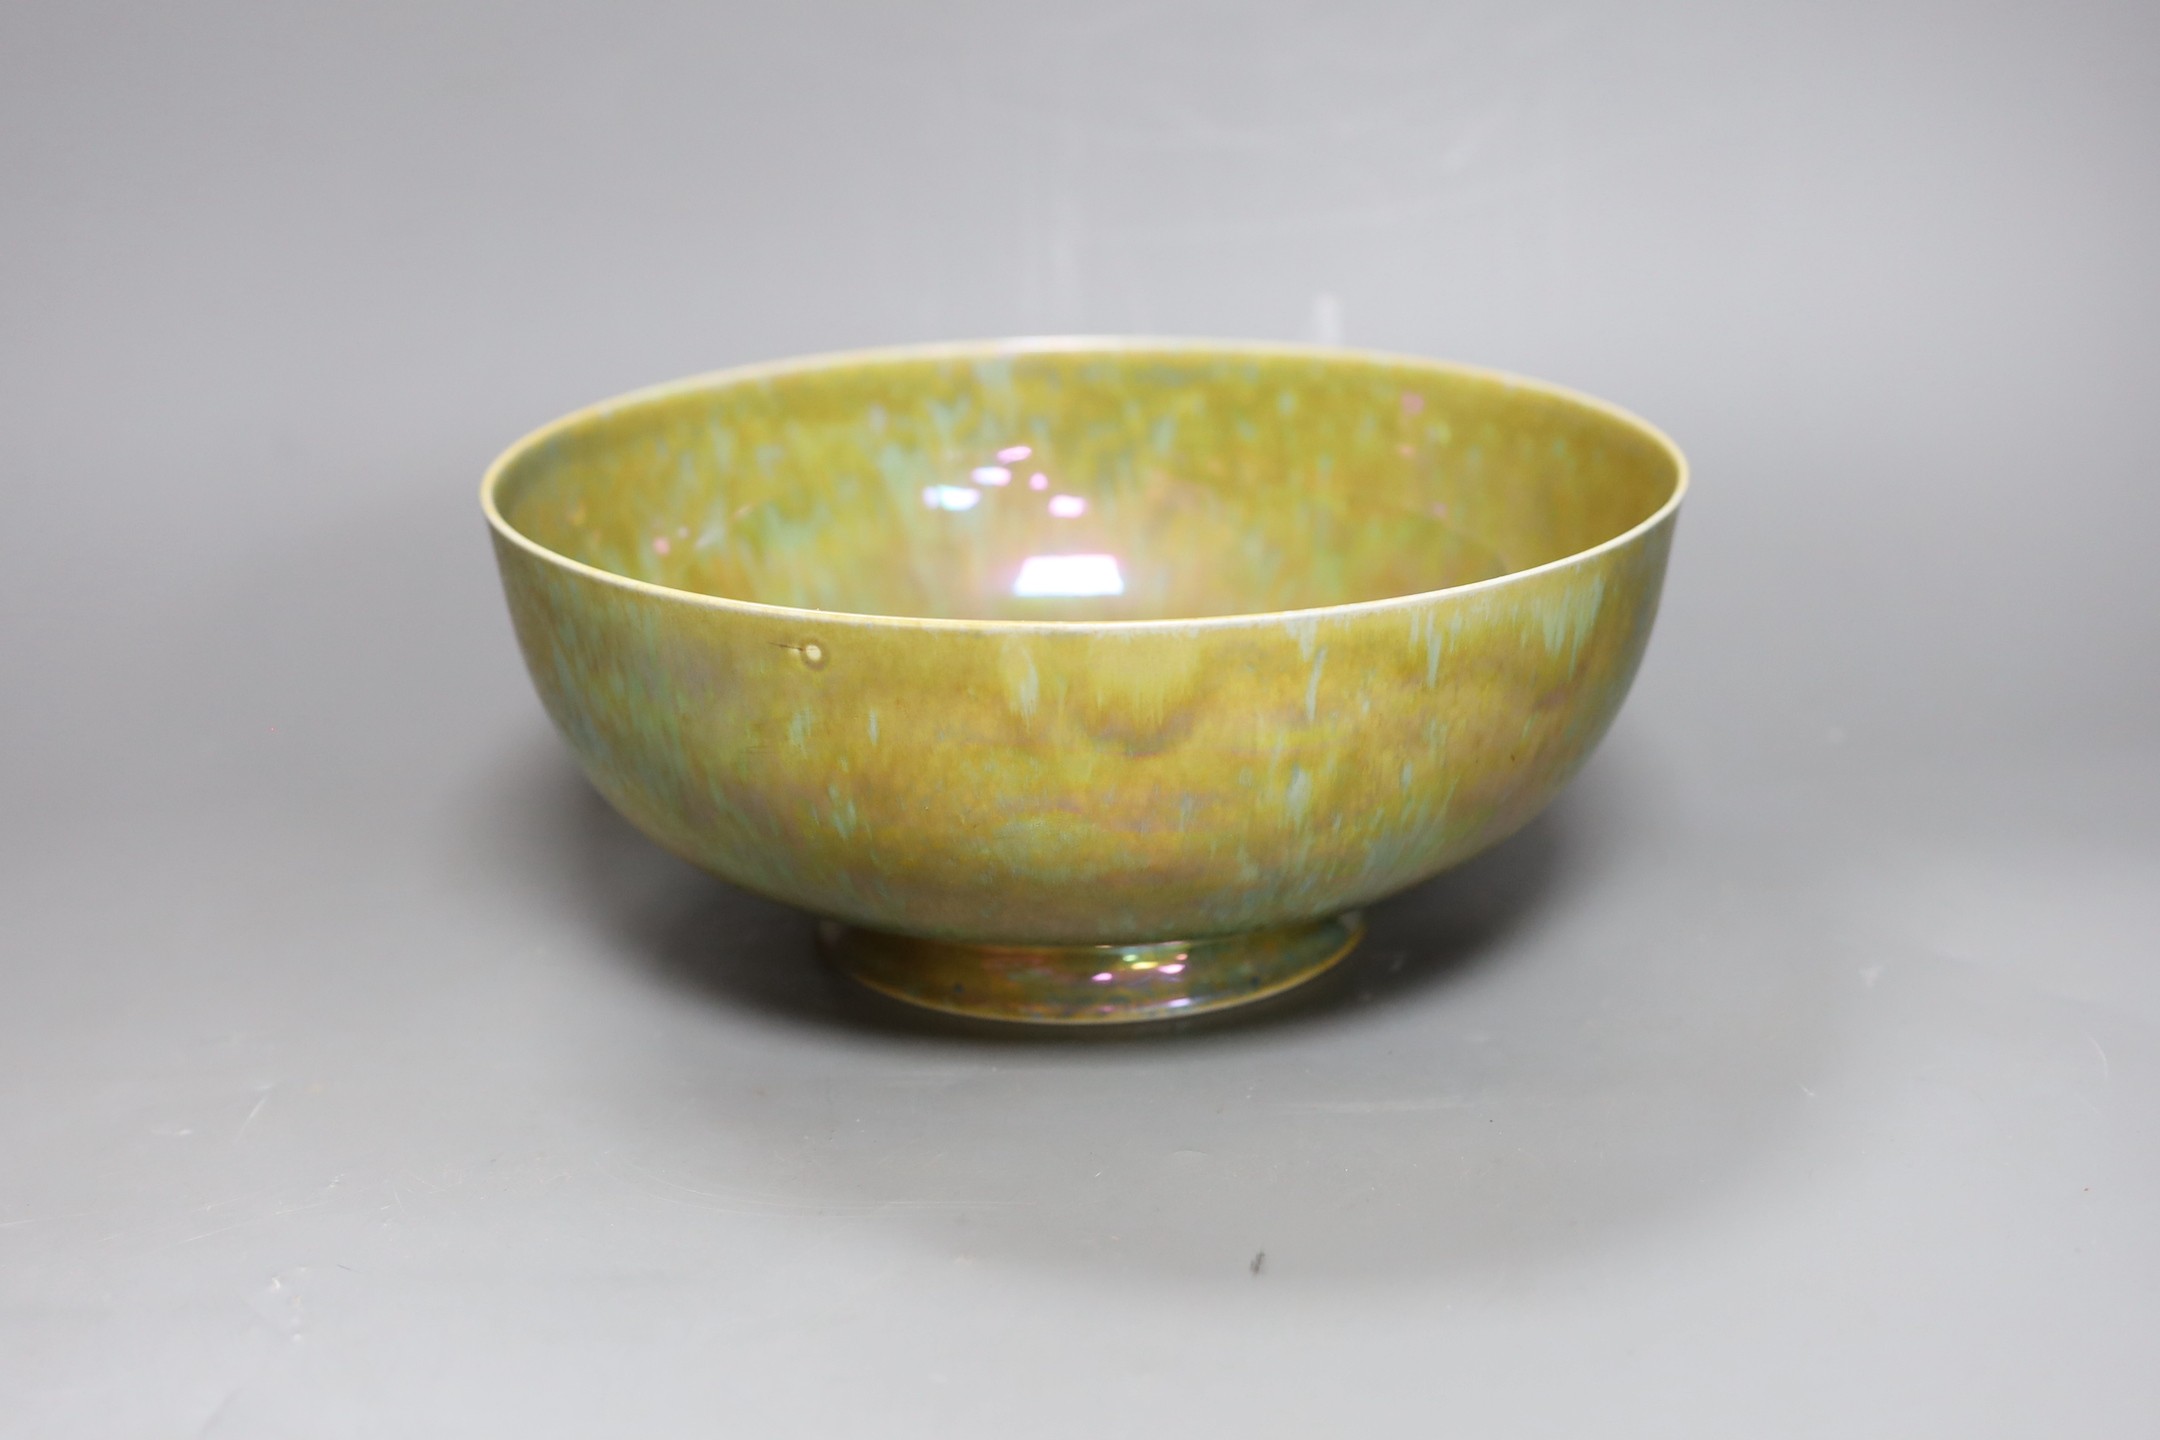 A Ruskin thinly potted green and ochre lustre fruit bowl, dated 1923, 25cm diameter